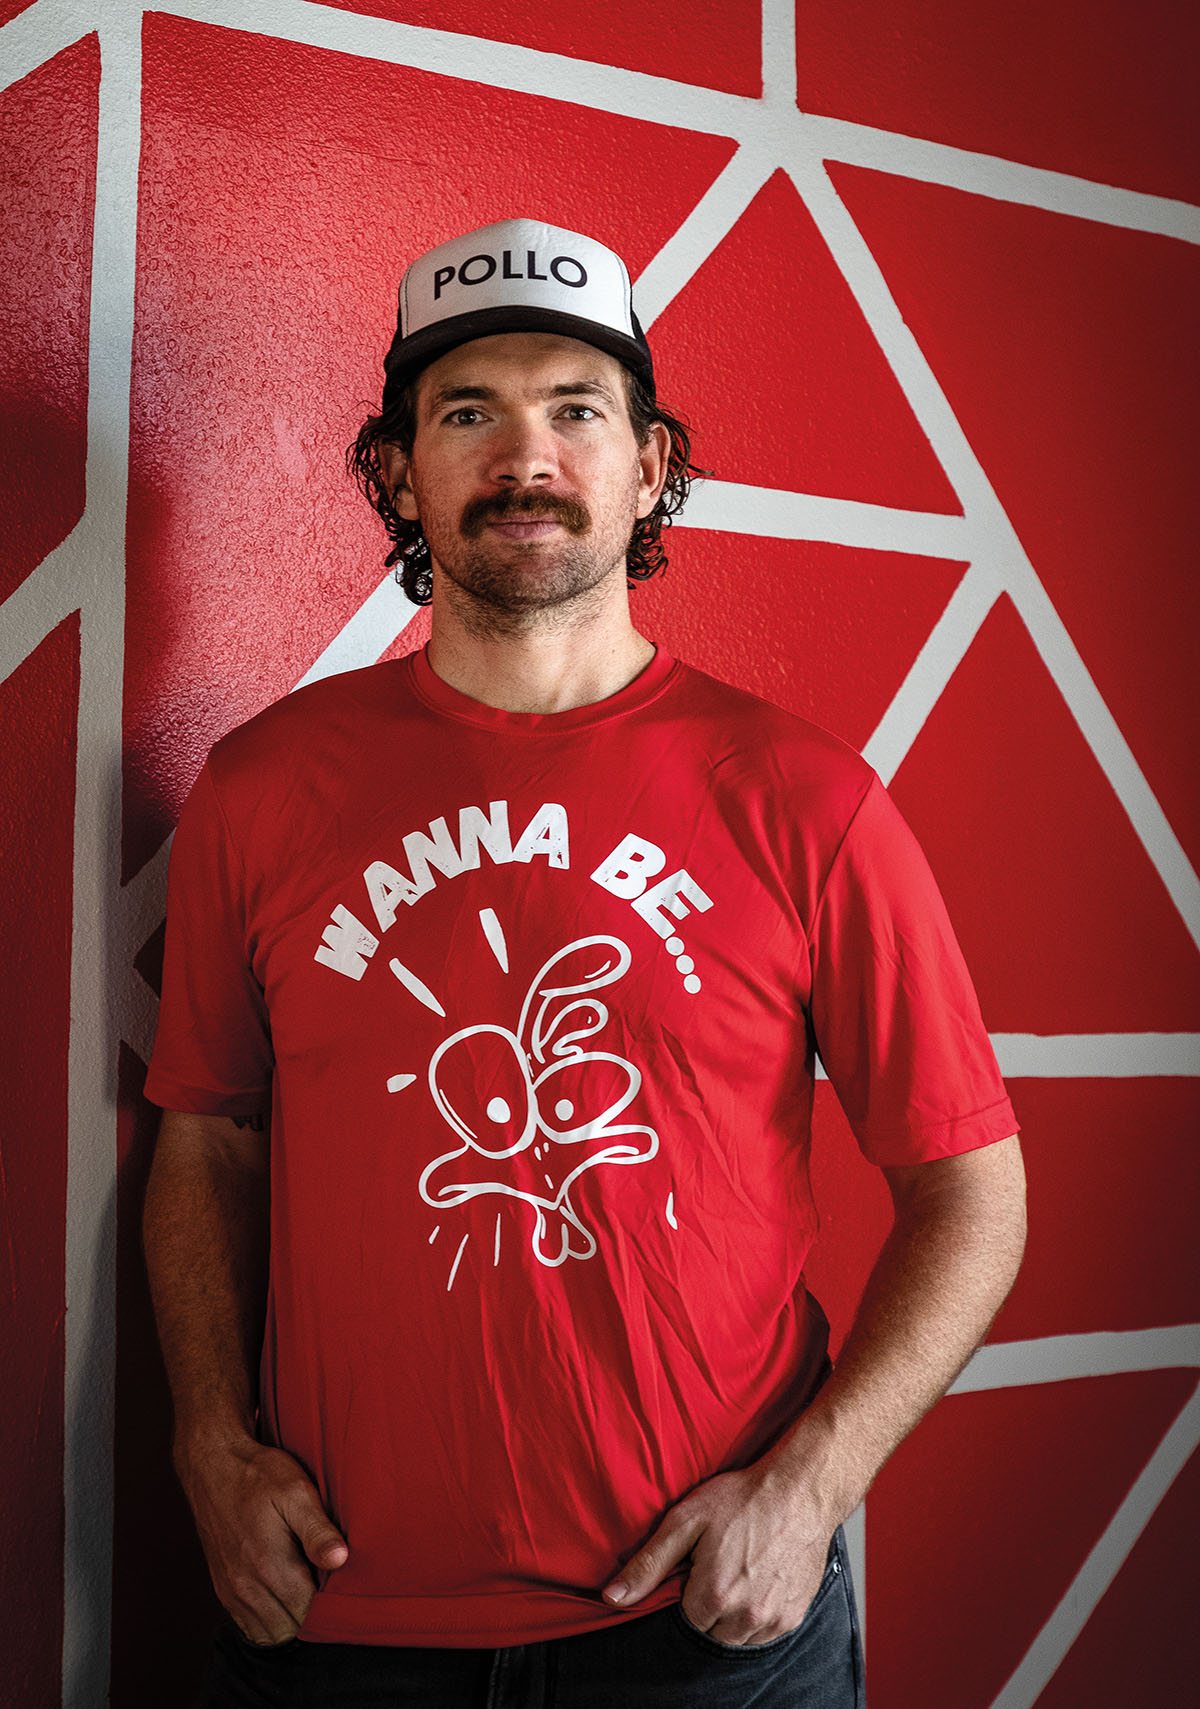 A man in a bright red shirt reading "Wanna Be" stands with a somber expression in front of a bright red wall wearing a white baseball cap